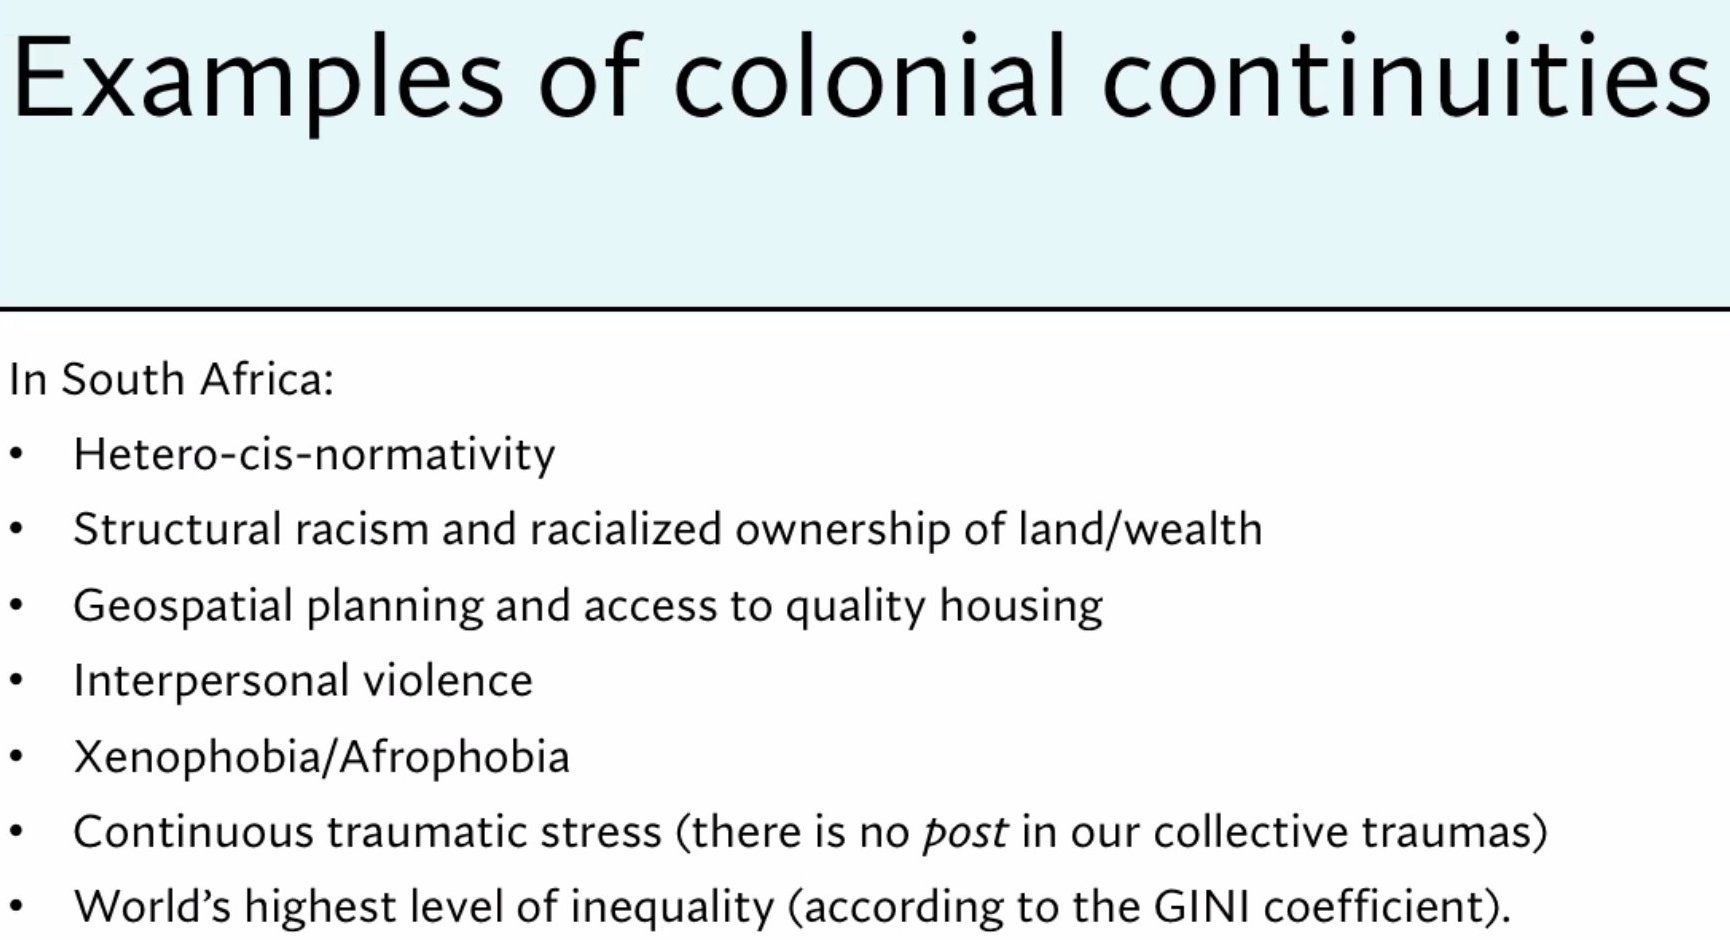 How colonial continuities manifest in South Africa: hetero-cis normativity, structural racism and racialized ownership of land/wealth, geospatial planning and access to quality housing, interpersonal violence, xenophobia/Afrophobia, continuous traumatic stress, world's highest level of inequality